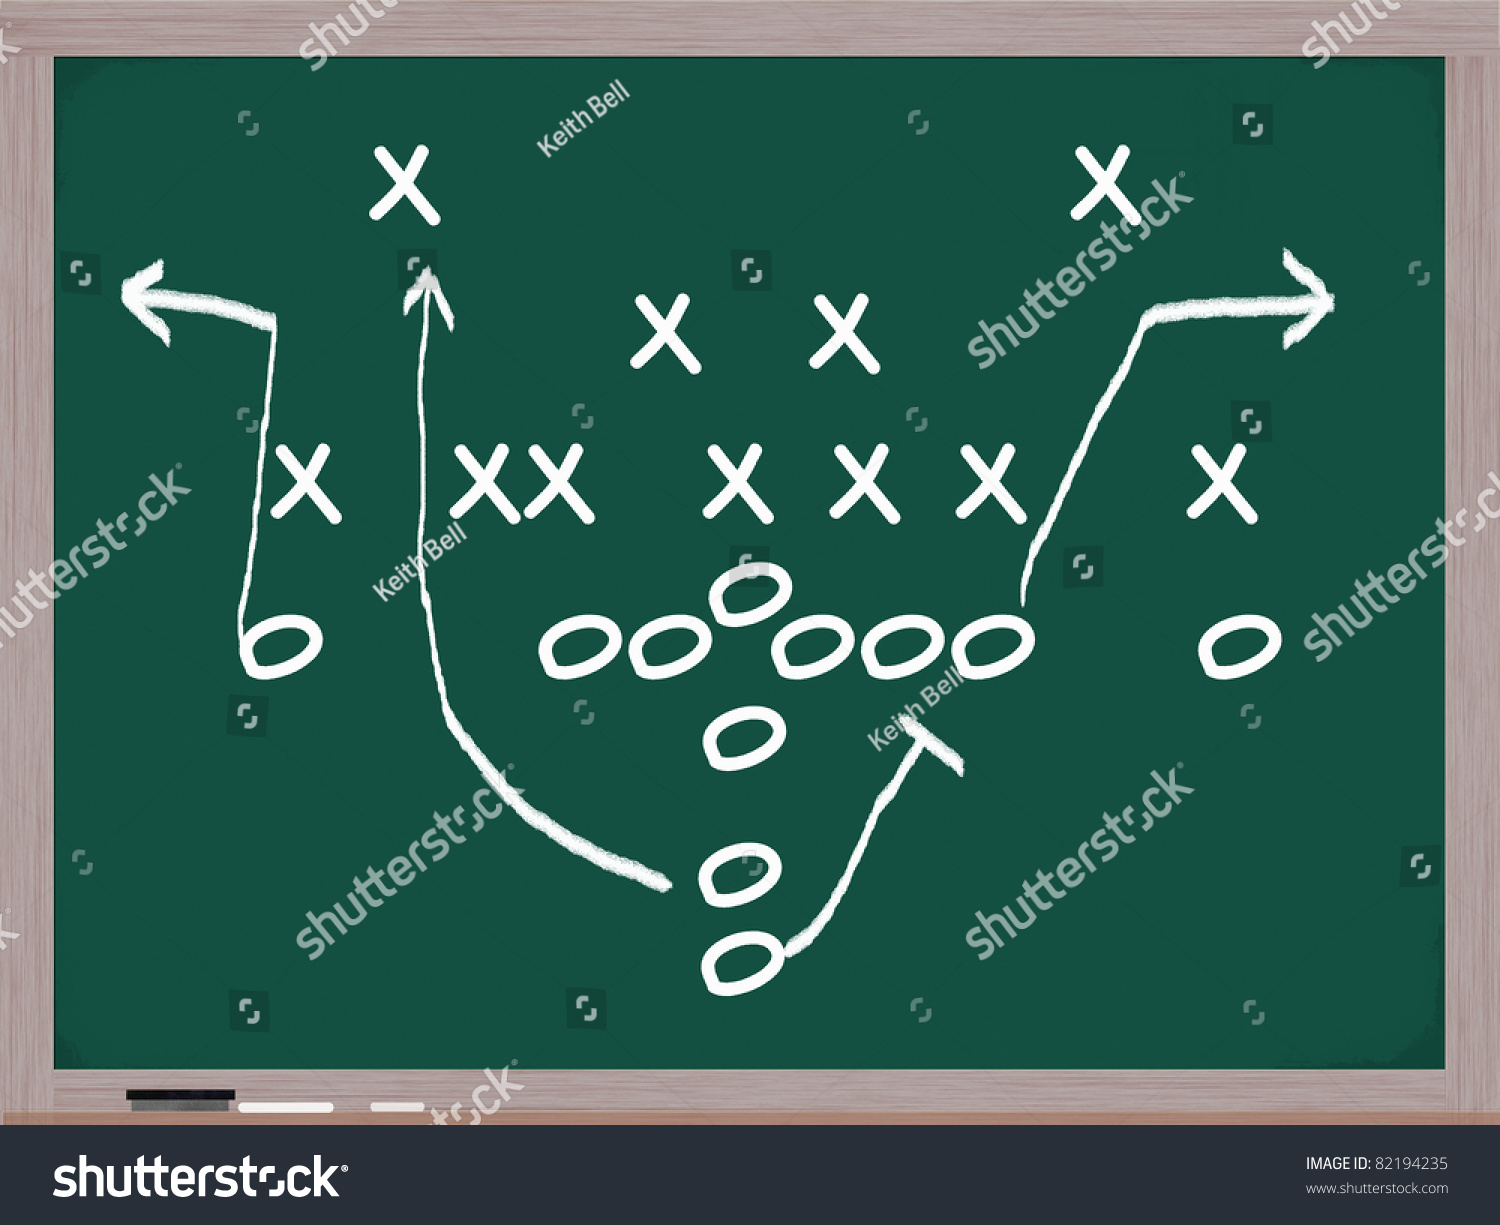 stock photo a football play diagram on a chalkboard in white chalk showing the formations and assignments 82194235